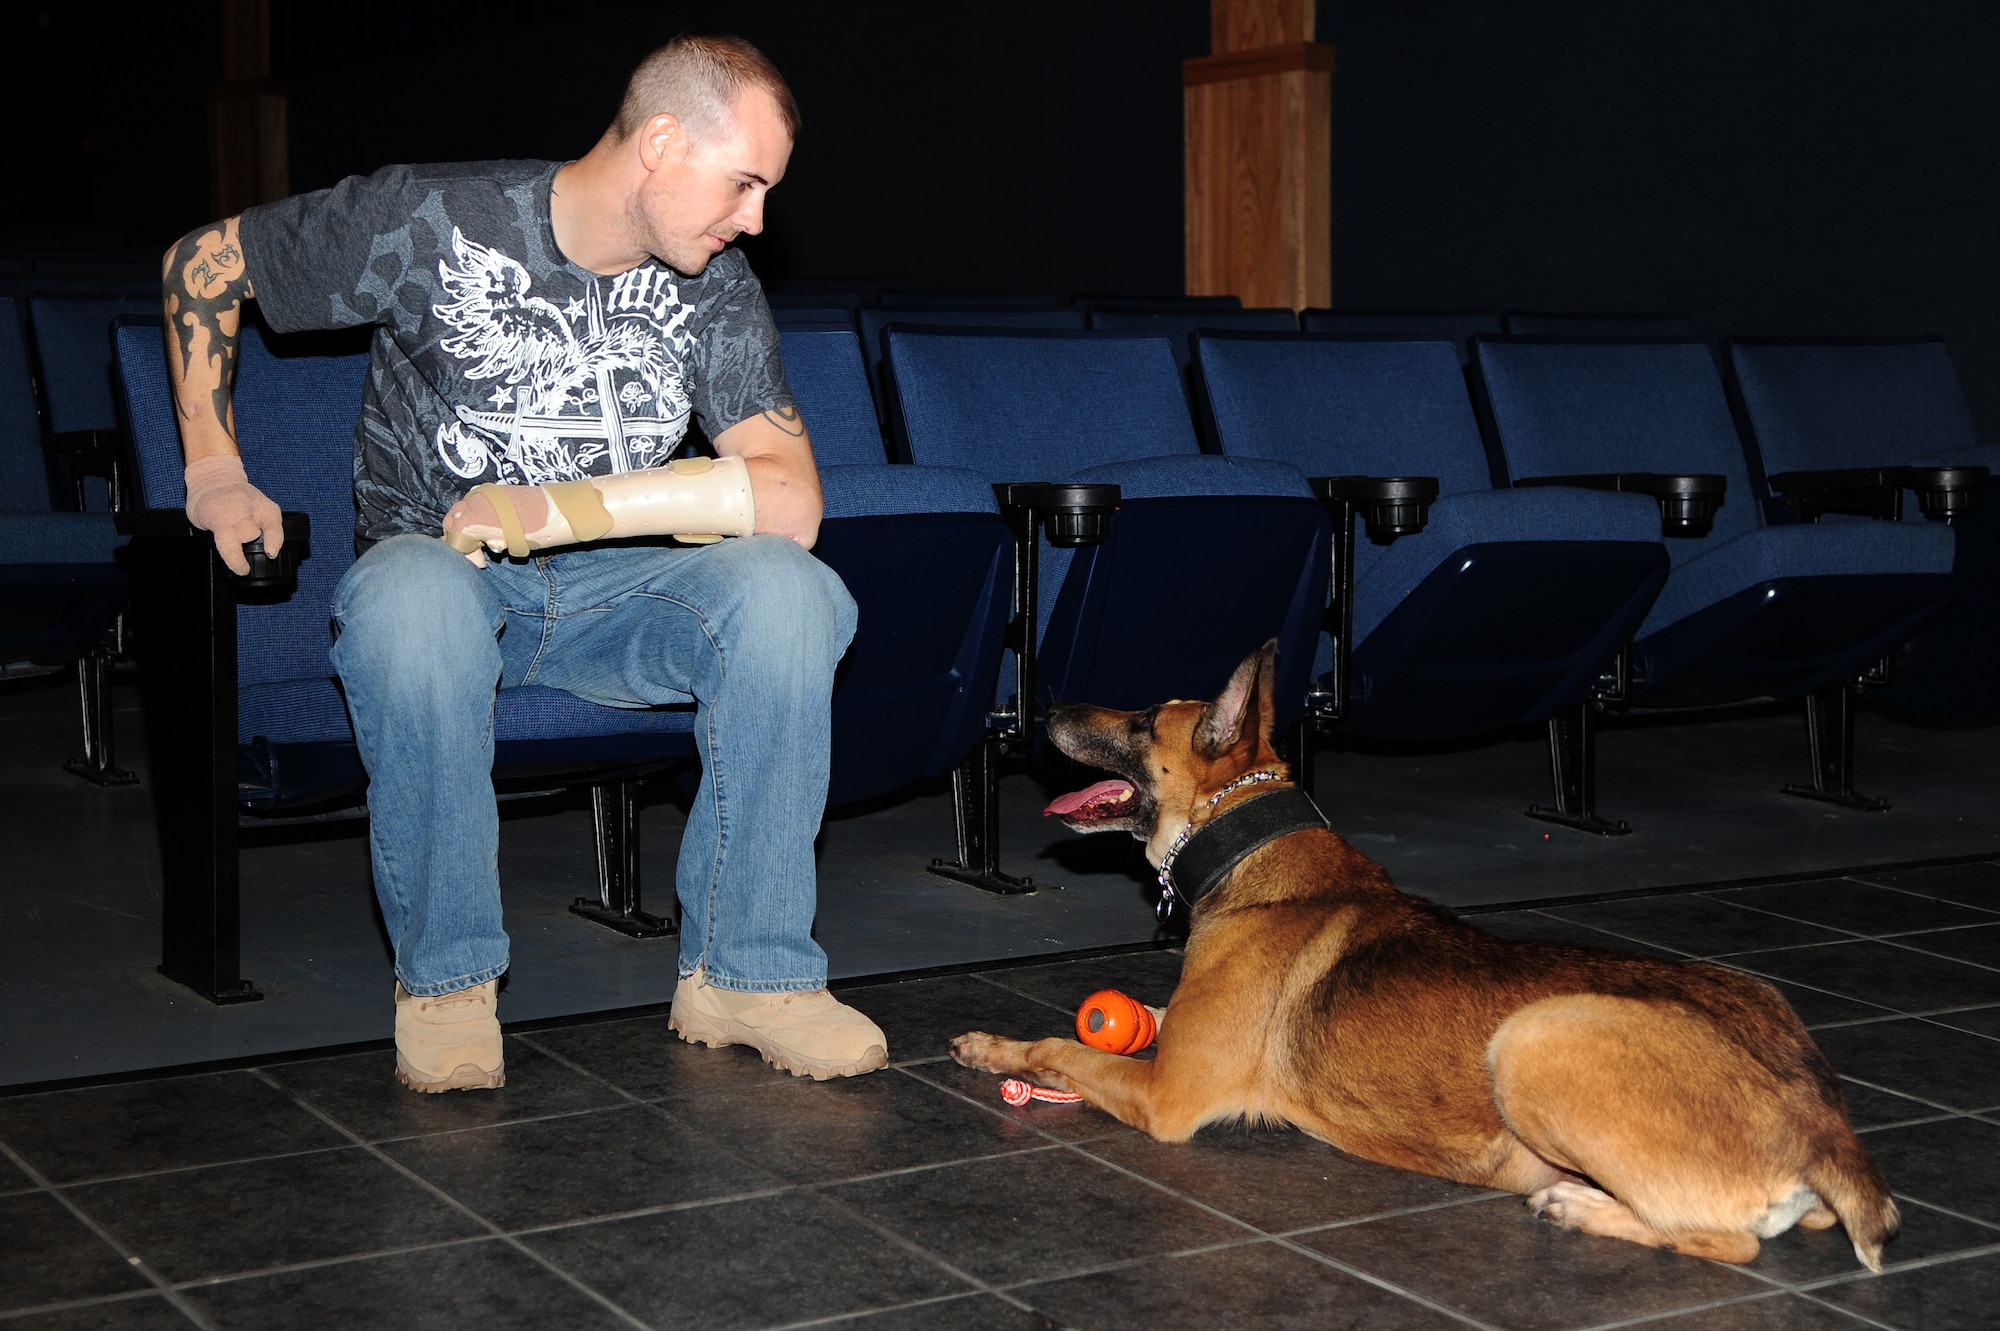 Staff Sgt. Leonard Anderson, 59th Patient Squadron, Lackland Air Force Base, Texas, talks to Azza, 354th Security Forces Squadron military working dog, at the base theater Oct. 17, 2012, Eielson Air Force Base, Alaska. Anderson worked with Azza, an 8-year-old Belgian Malinois, for over a year while he was assigned to the 354th SFS MWD section. (U.S. Air Force photo/Airman 1st Class Zachary Perras)